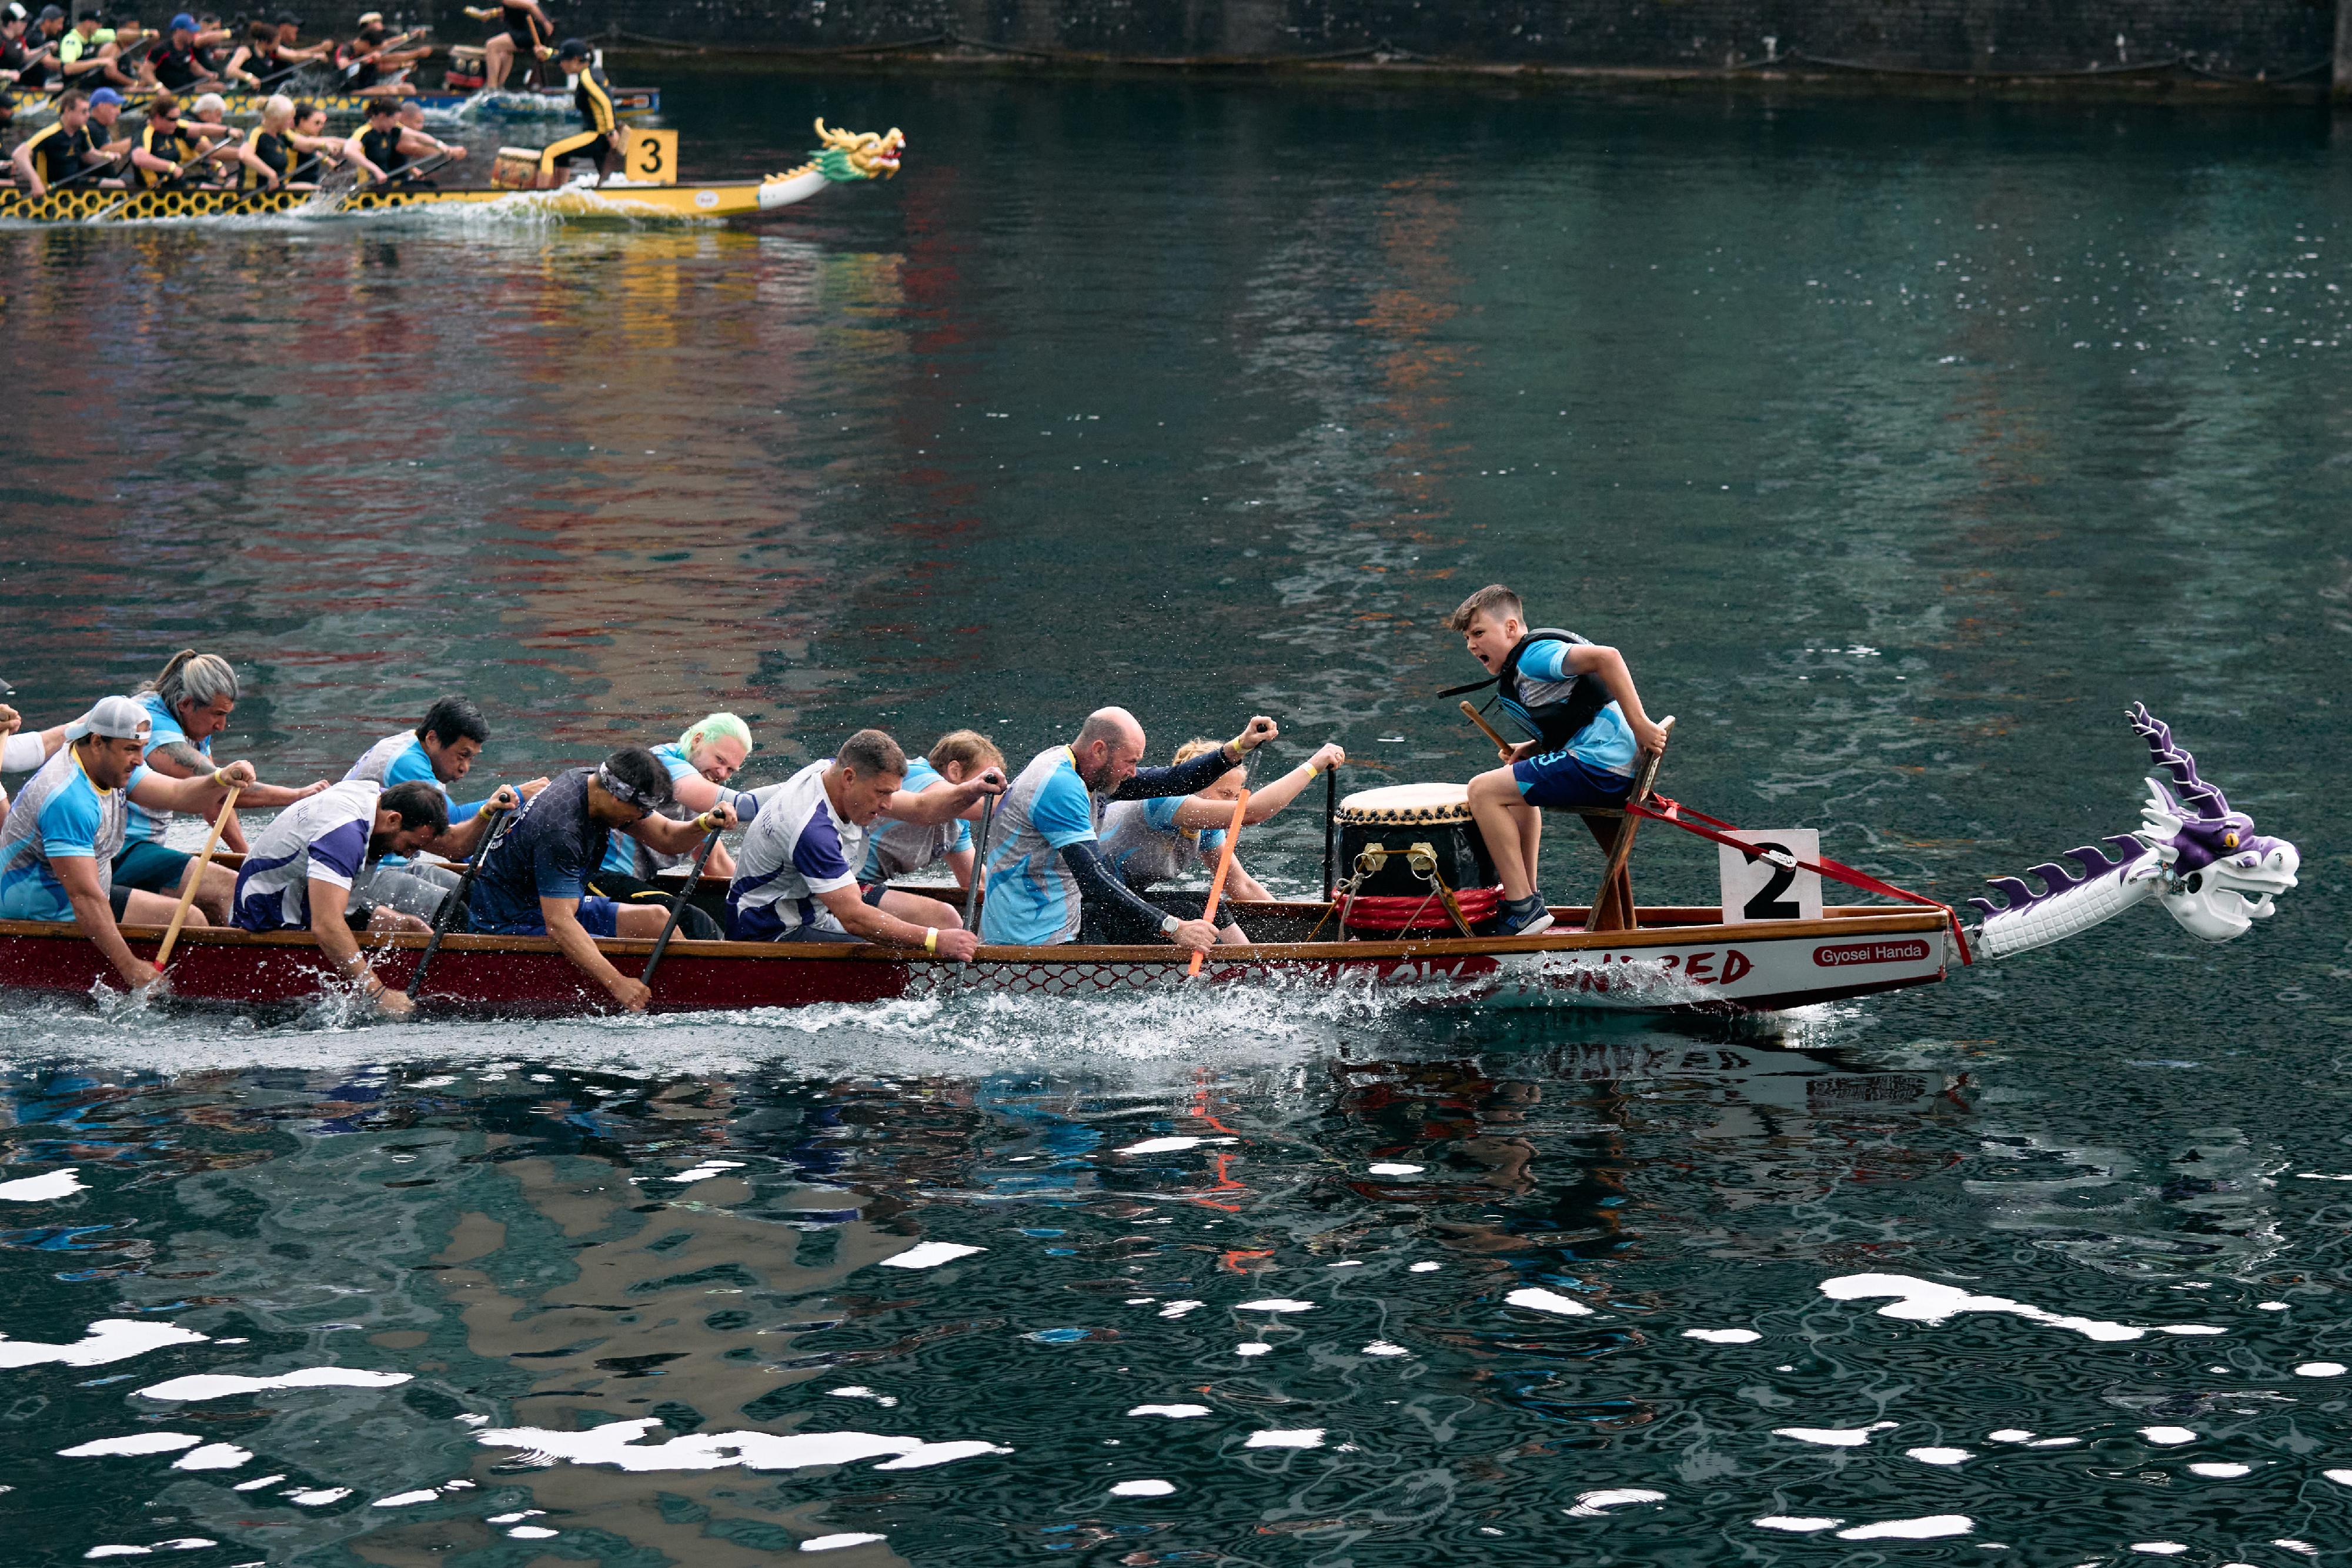 With the support of the Hong Kong Economic and Trade Office, London, the 2023 UK Chinese Dragon Boat Festival was held from June 17 to 18 (London time) in Manchester, United Kingdom. Photo shows the athletes in the dragon boat race going all out to compete for the champion.